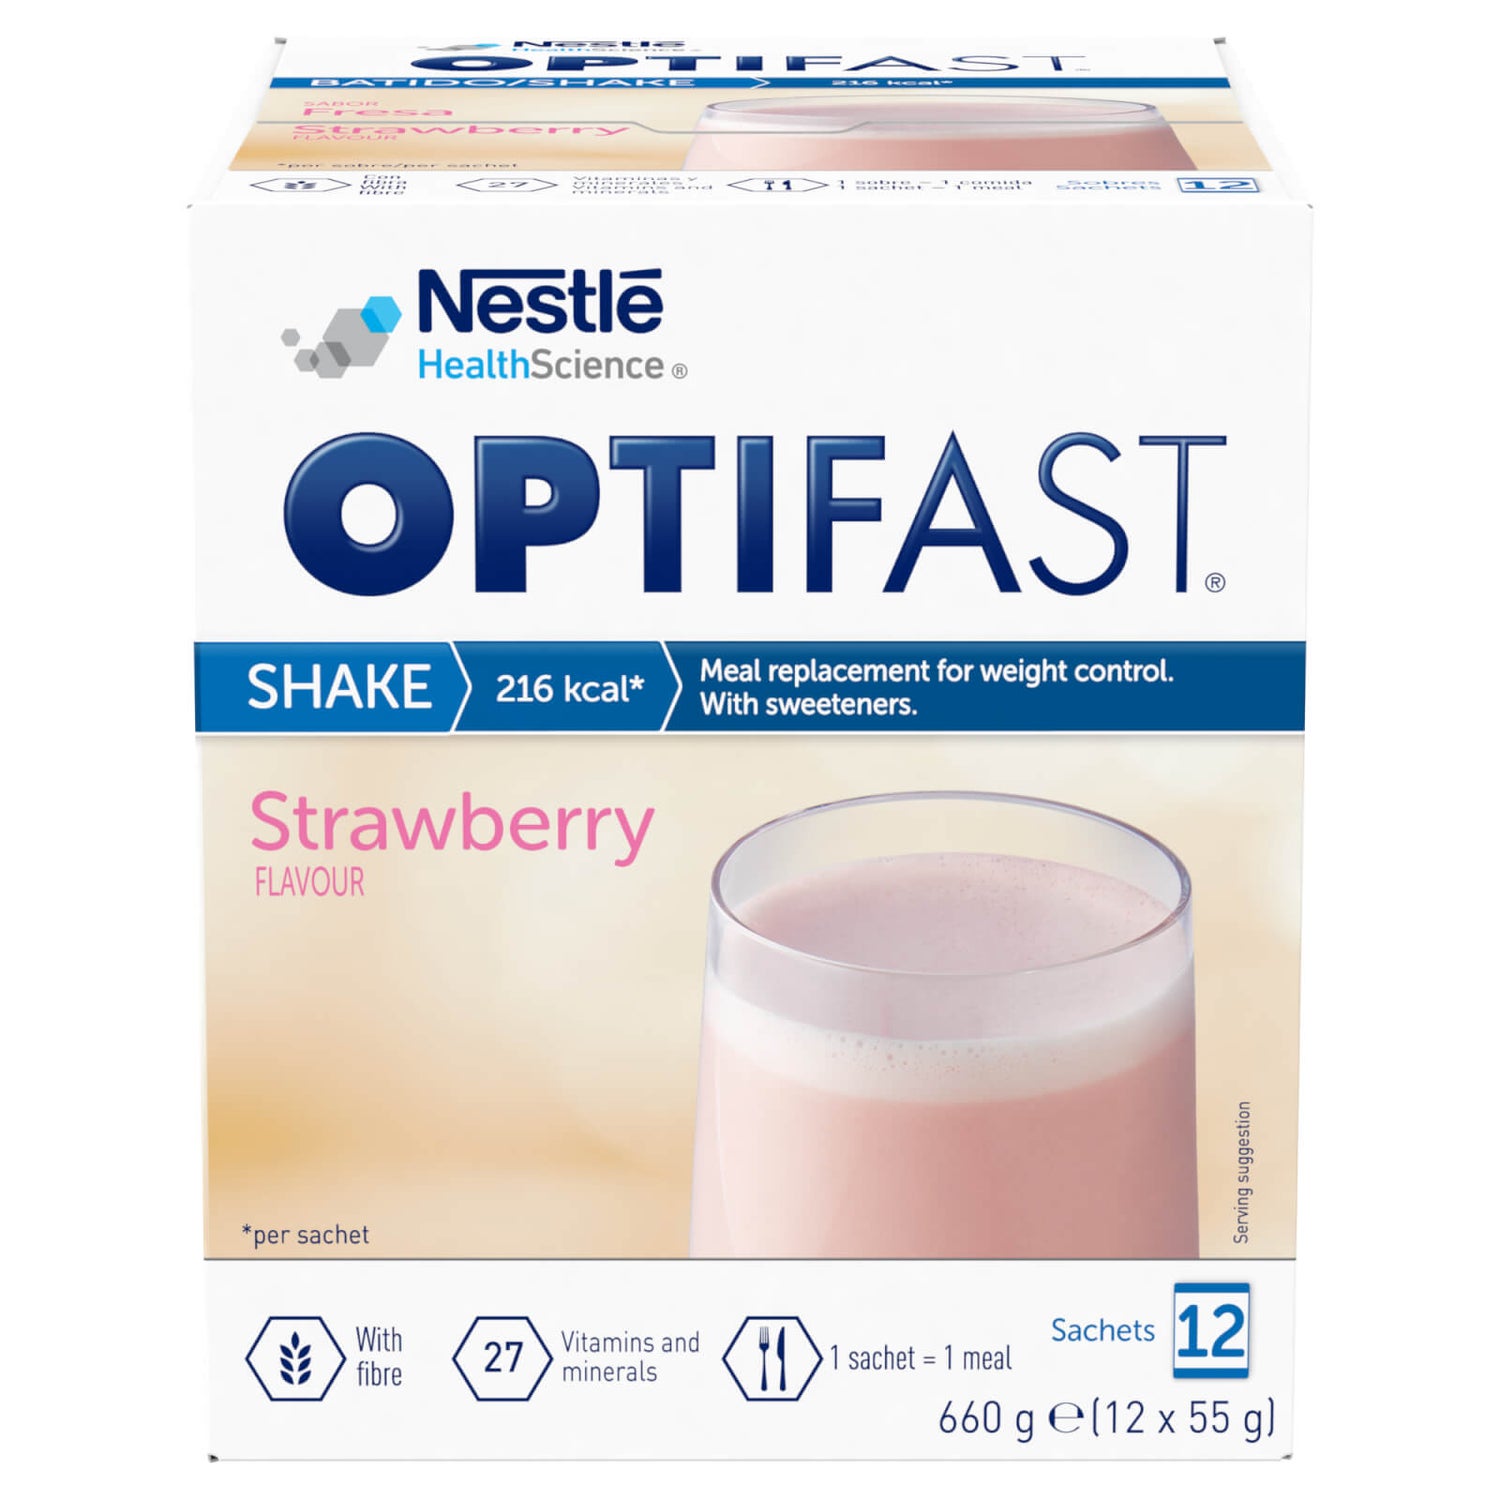 OPTIFAST Shakes - Strawberry - 1 Month Supply (32 Sachets)